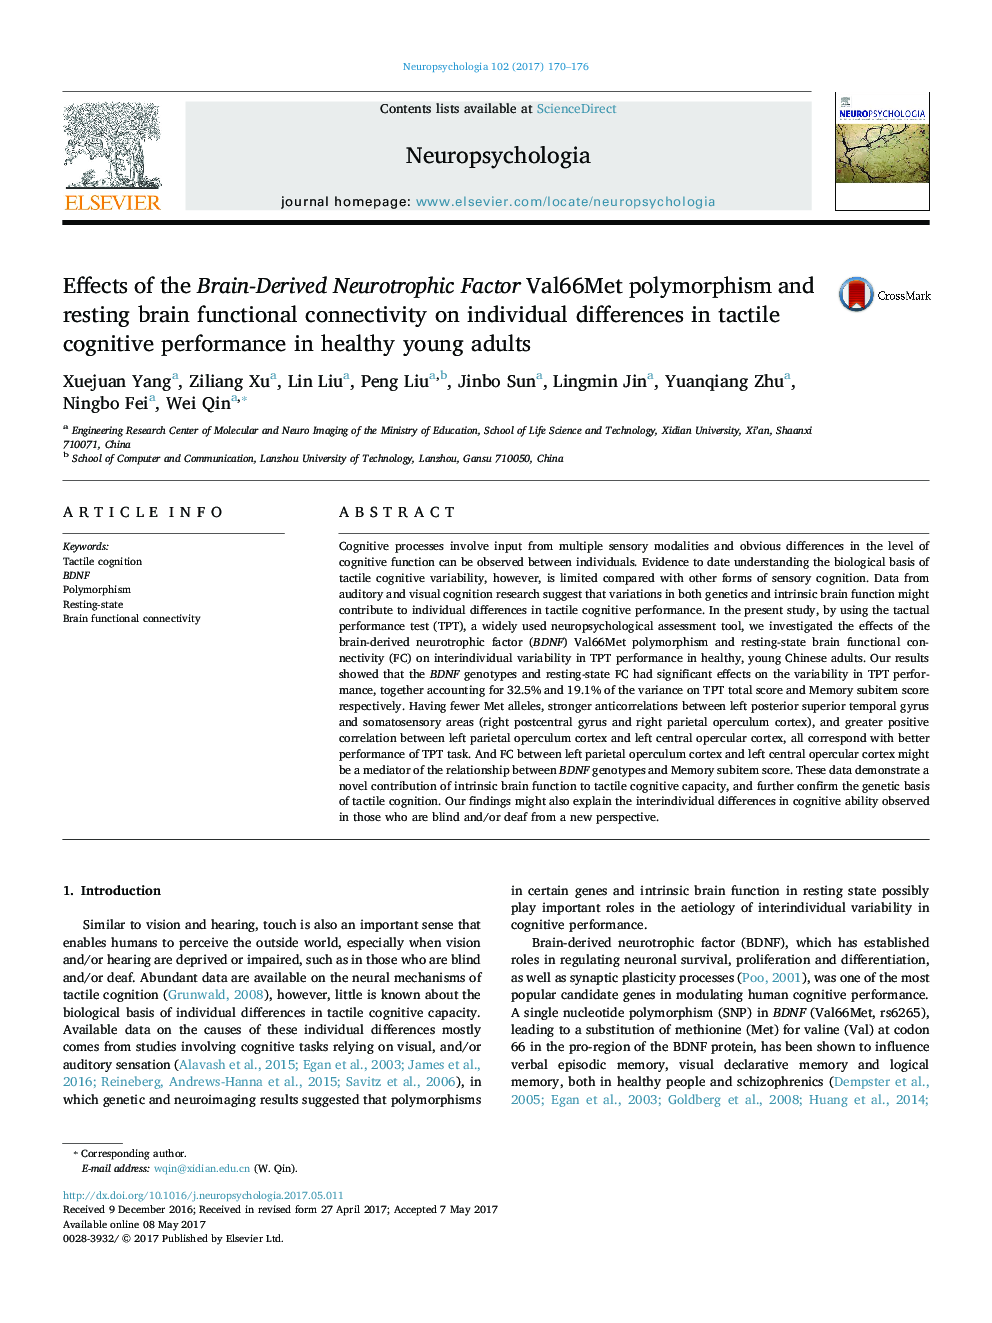 Effects of the Brain-Derived Neurotrophic Factor Val66Met polymorphism and resting brain functional connectivity on individual differences in tactile cognitive performance in healthy young adults